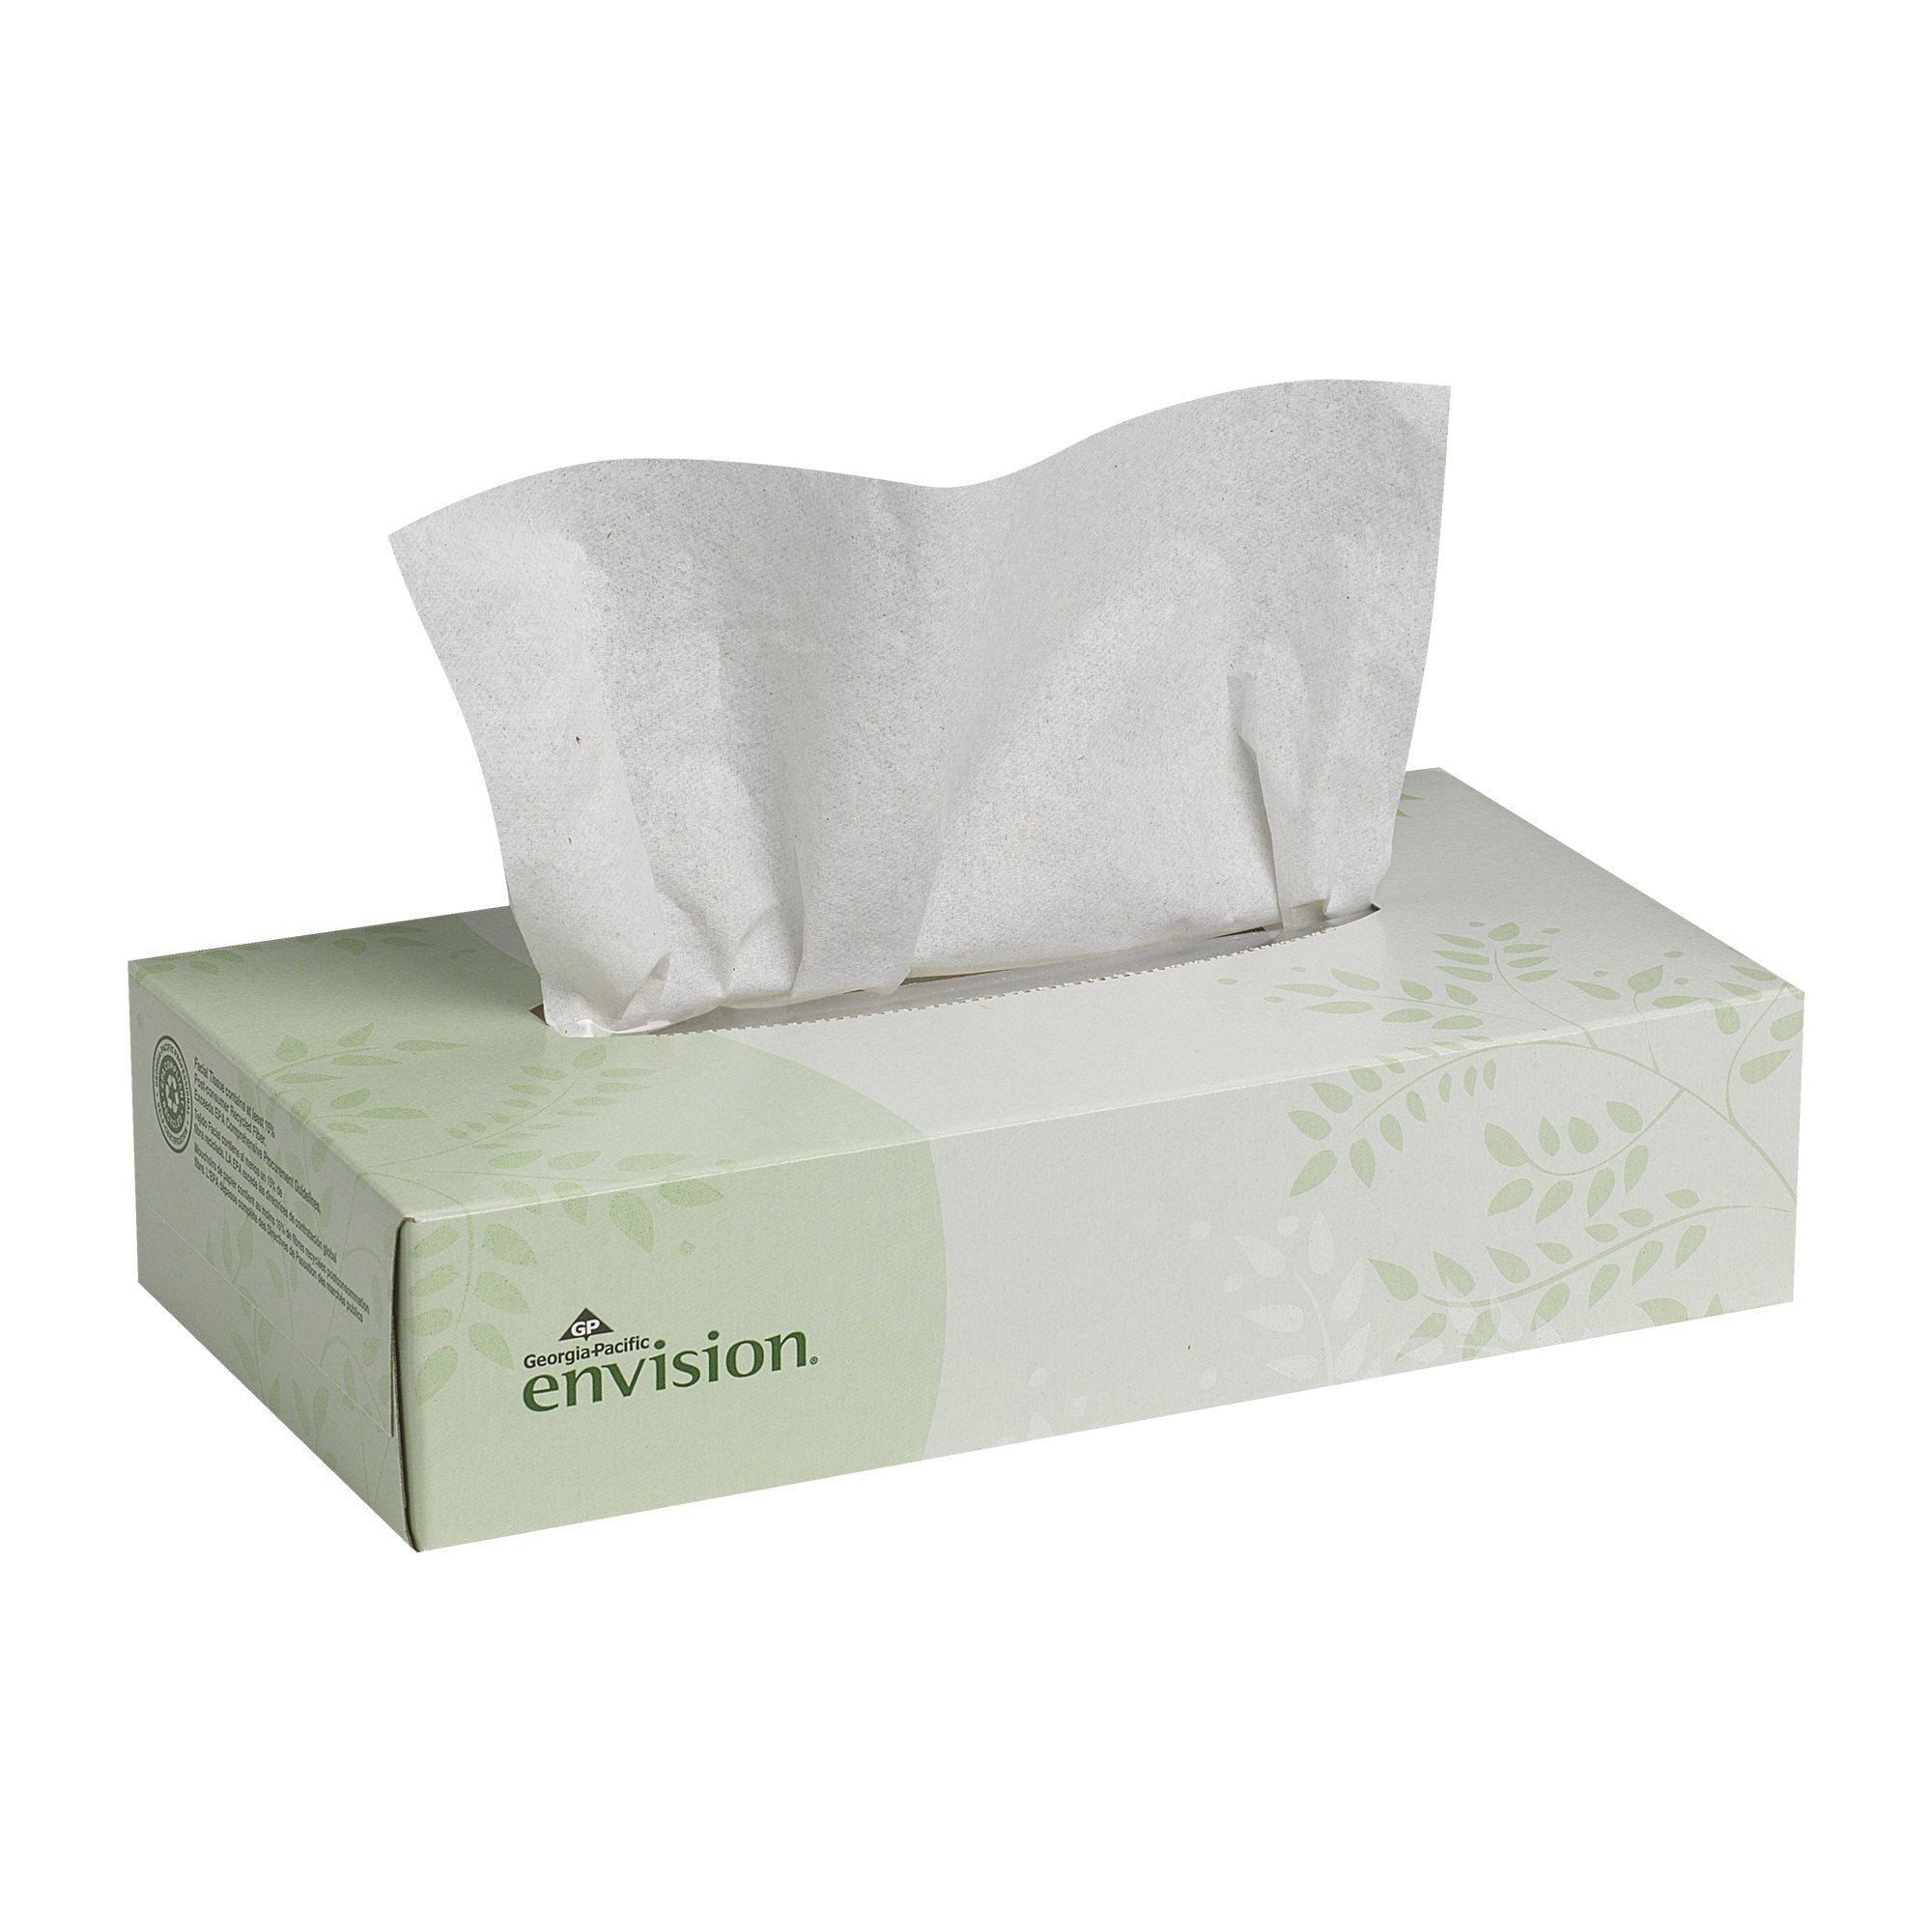 Envision Facial Tissue White 8 X 8-3/10 Inch -Case of 30